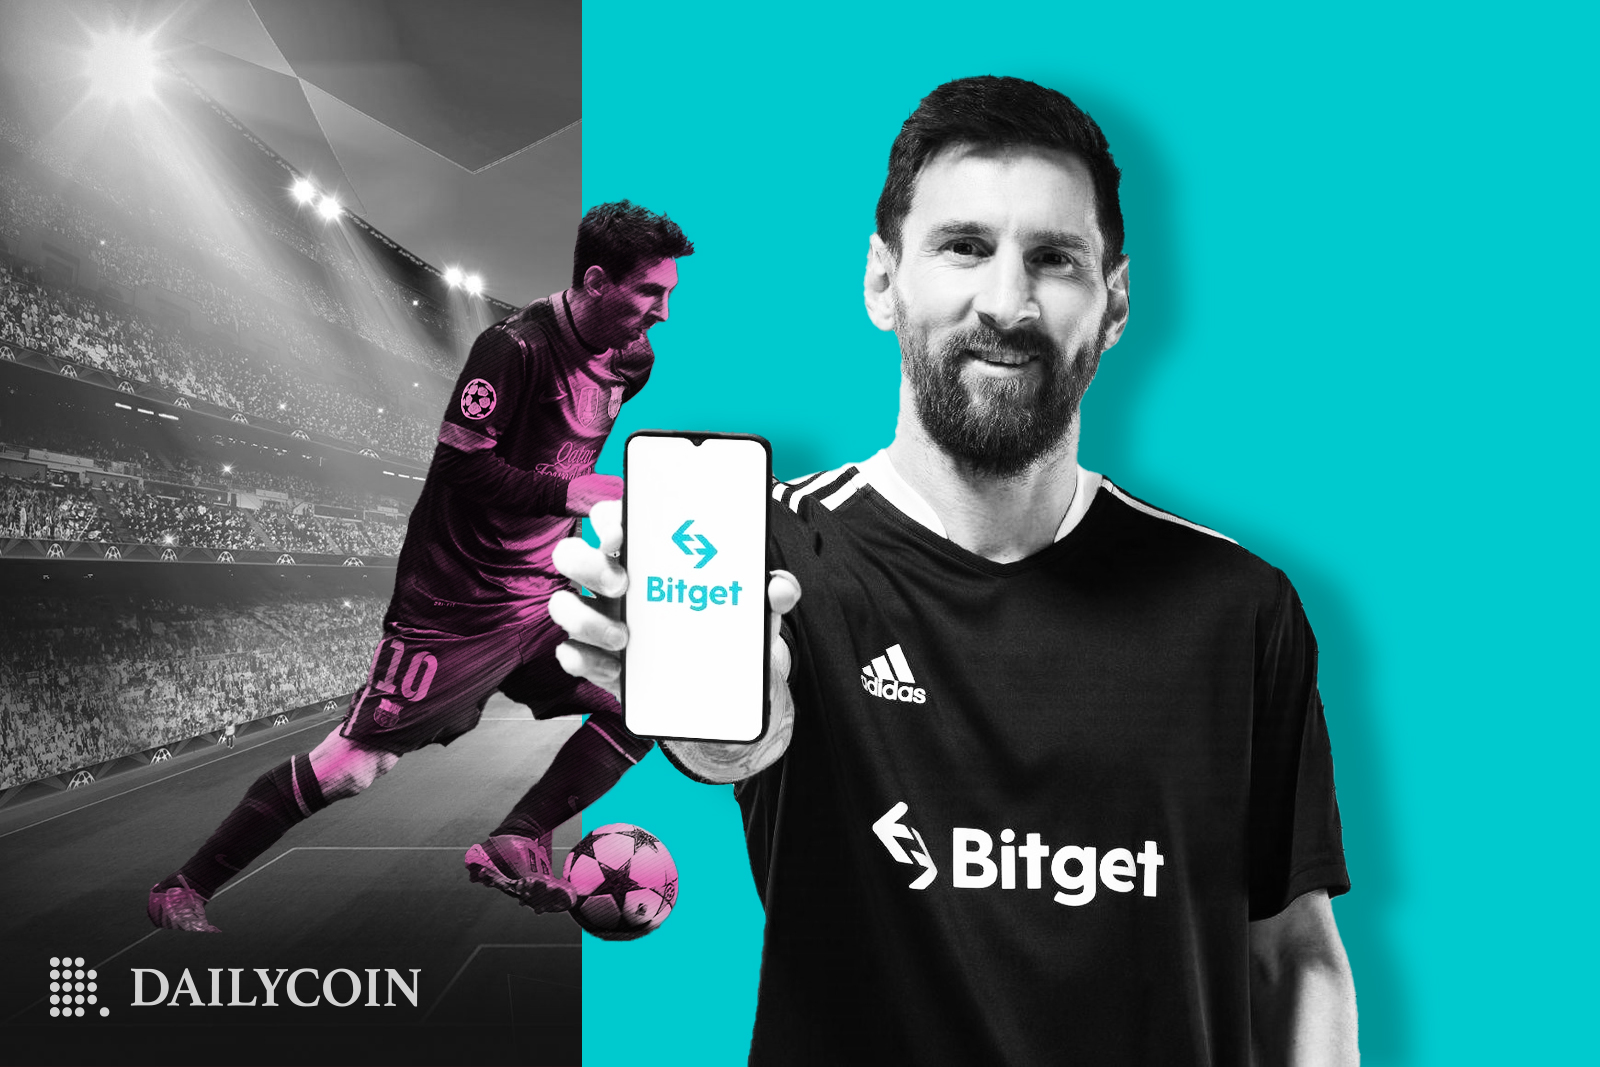 Lionel Messi wearing Bitget t-shirt and holding phone with Bitget logo on